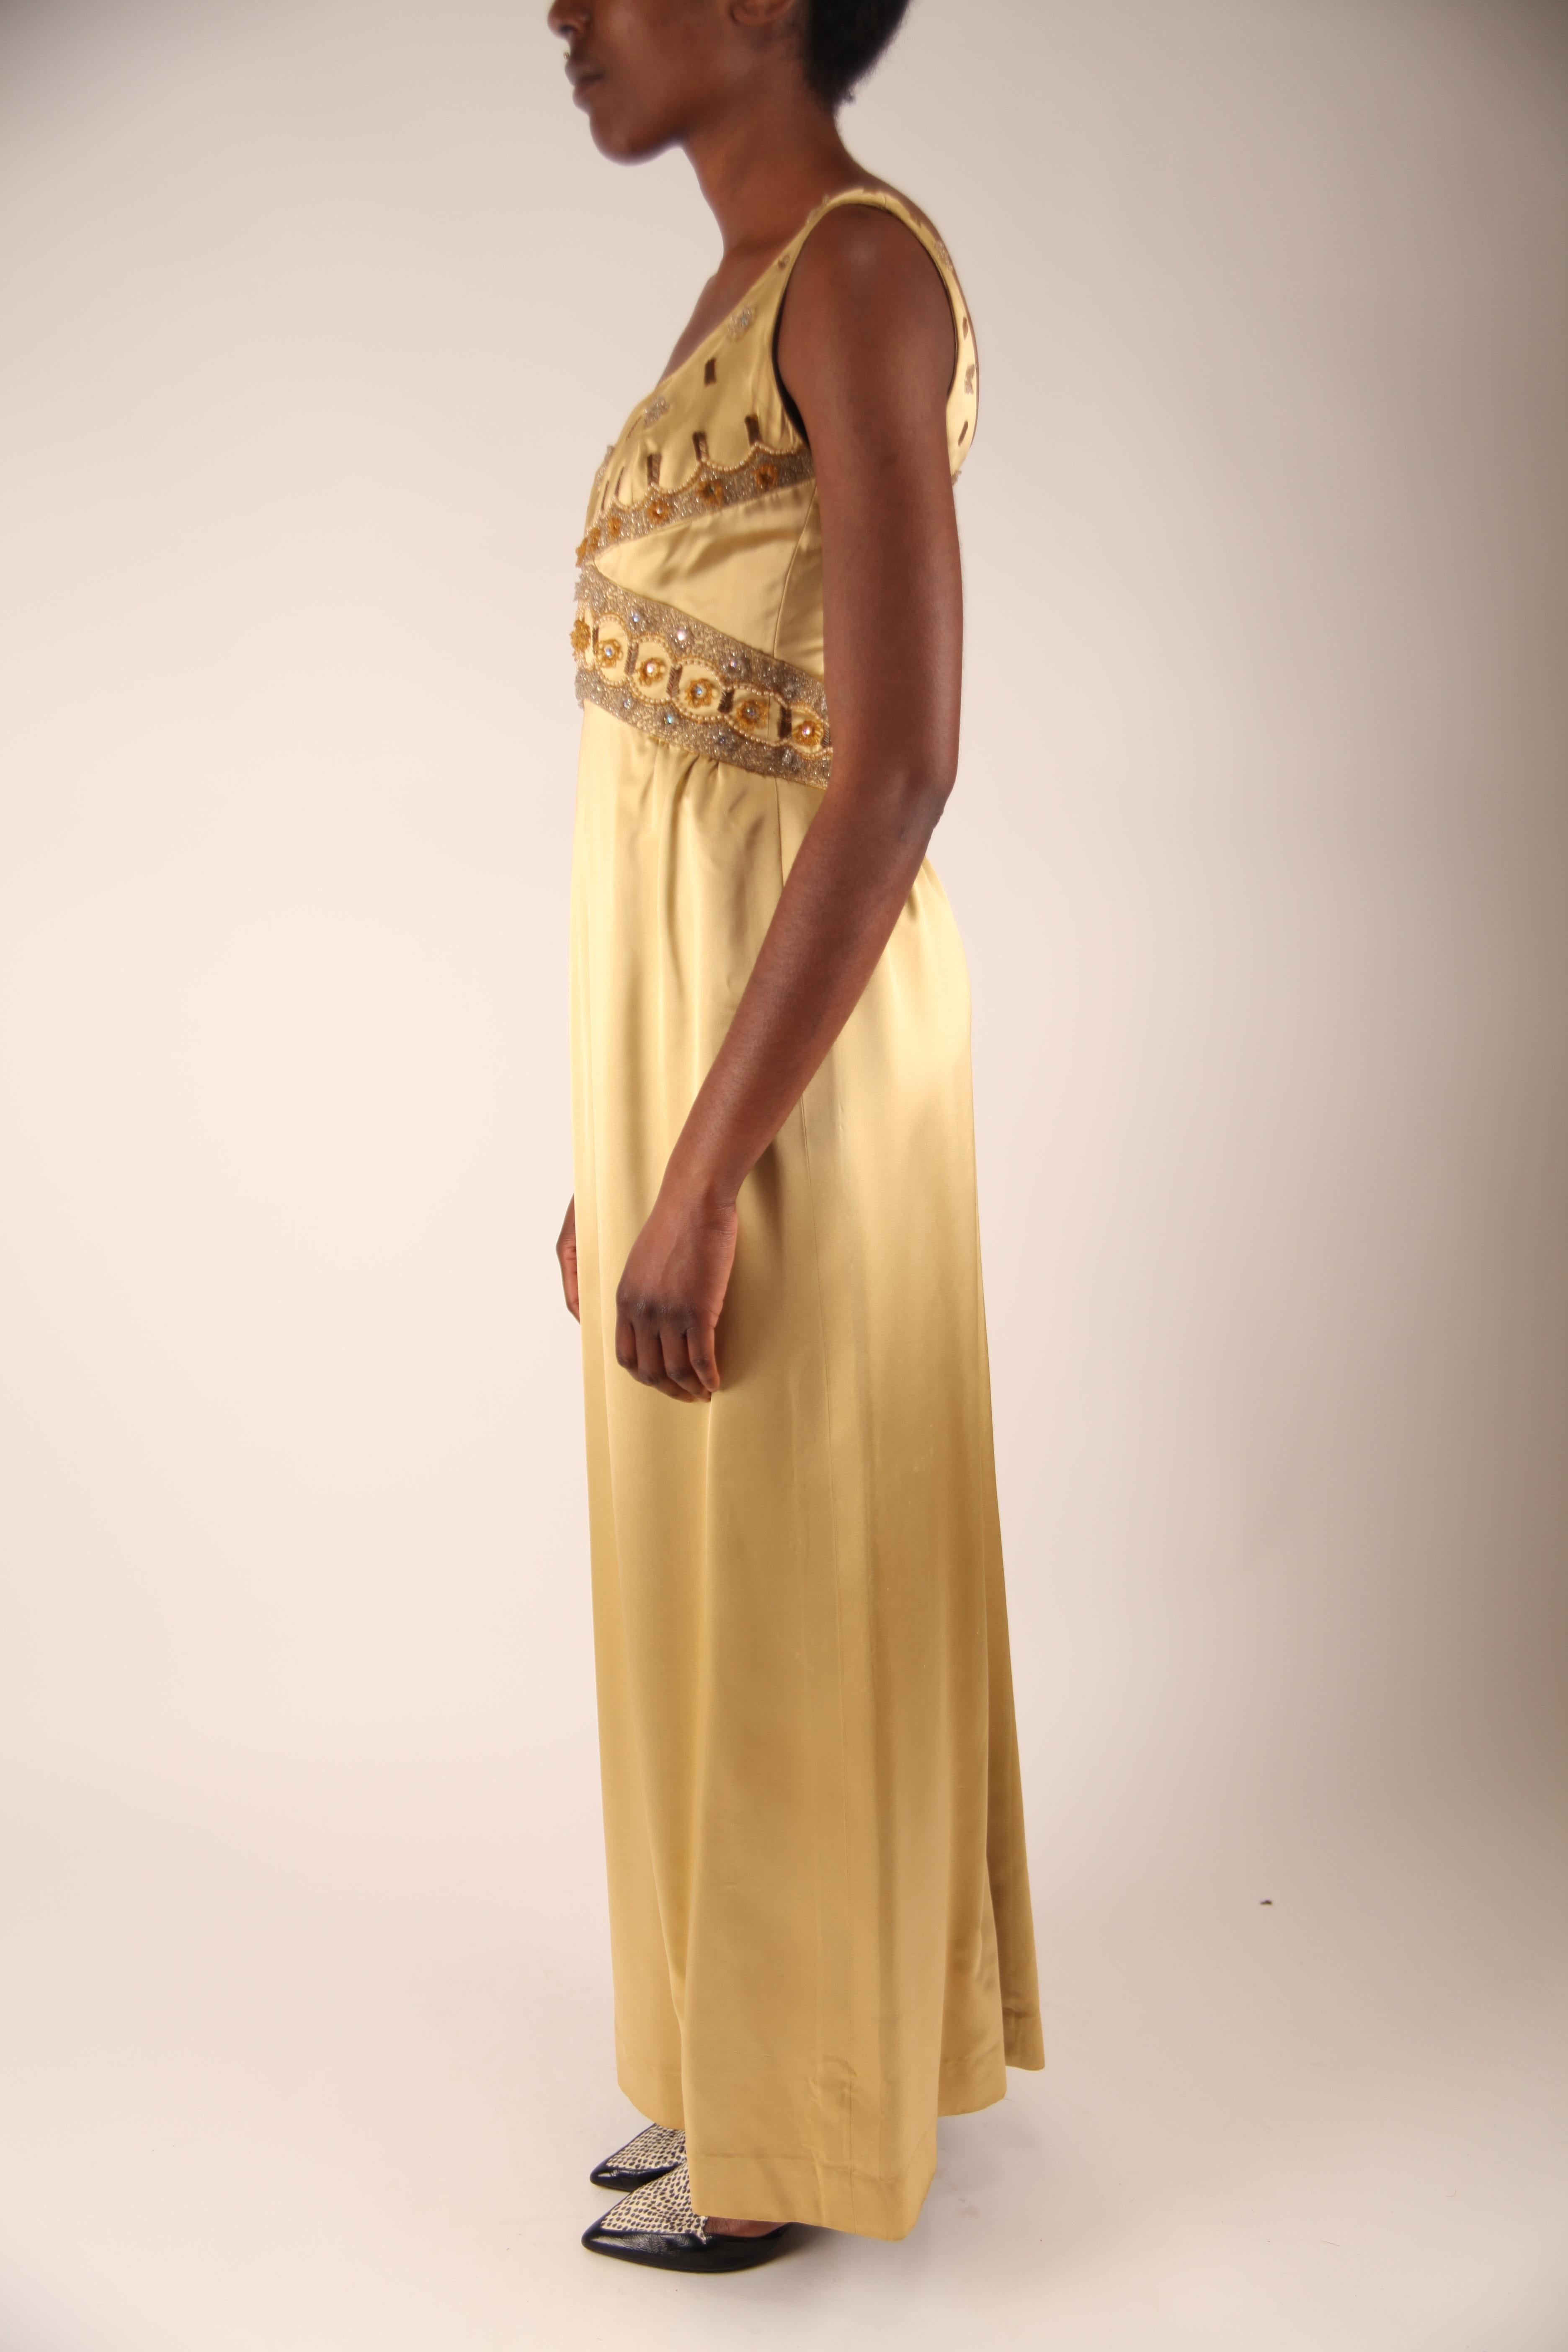 Jacques Heim couture gold silk satin evening gown, circa 1960s In Good Condition For Sale In London, GB